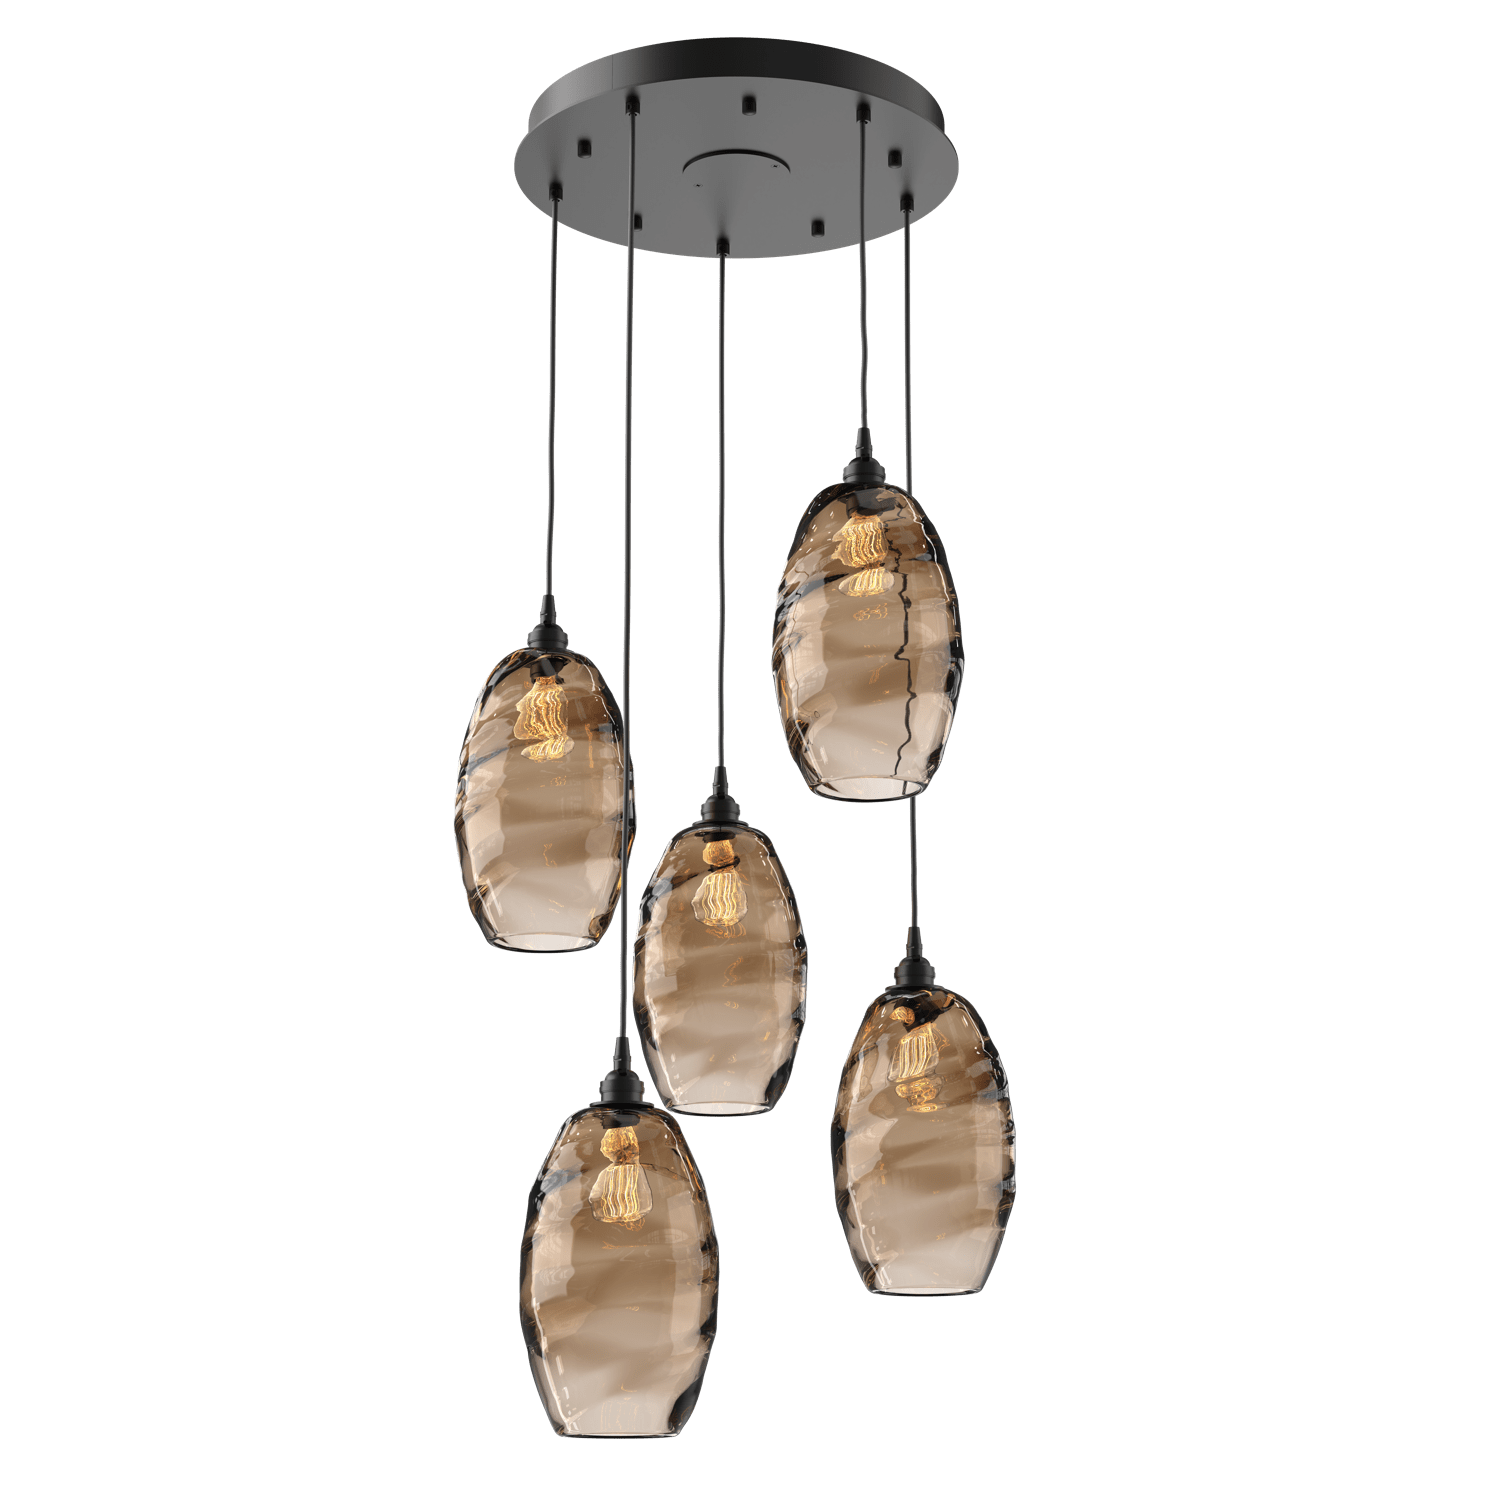 CHB0035-05-MB-OB-Hammerton-Studio-Optic-Blown-Glass-Elisse-5-light-round-pendant-chandelier-with-matte-black-finish-and-optic-bronze-blown-glass-shades-and-incandescent-lamping